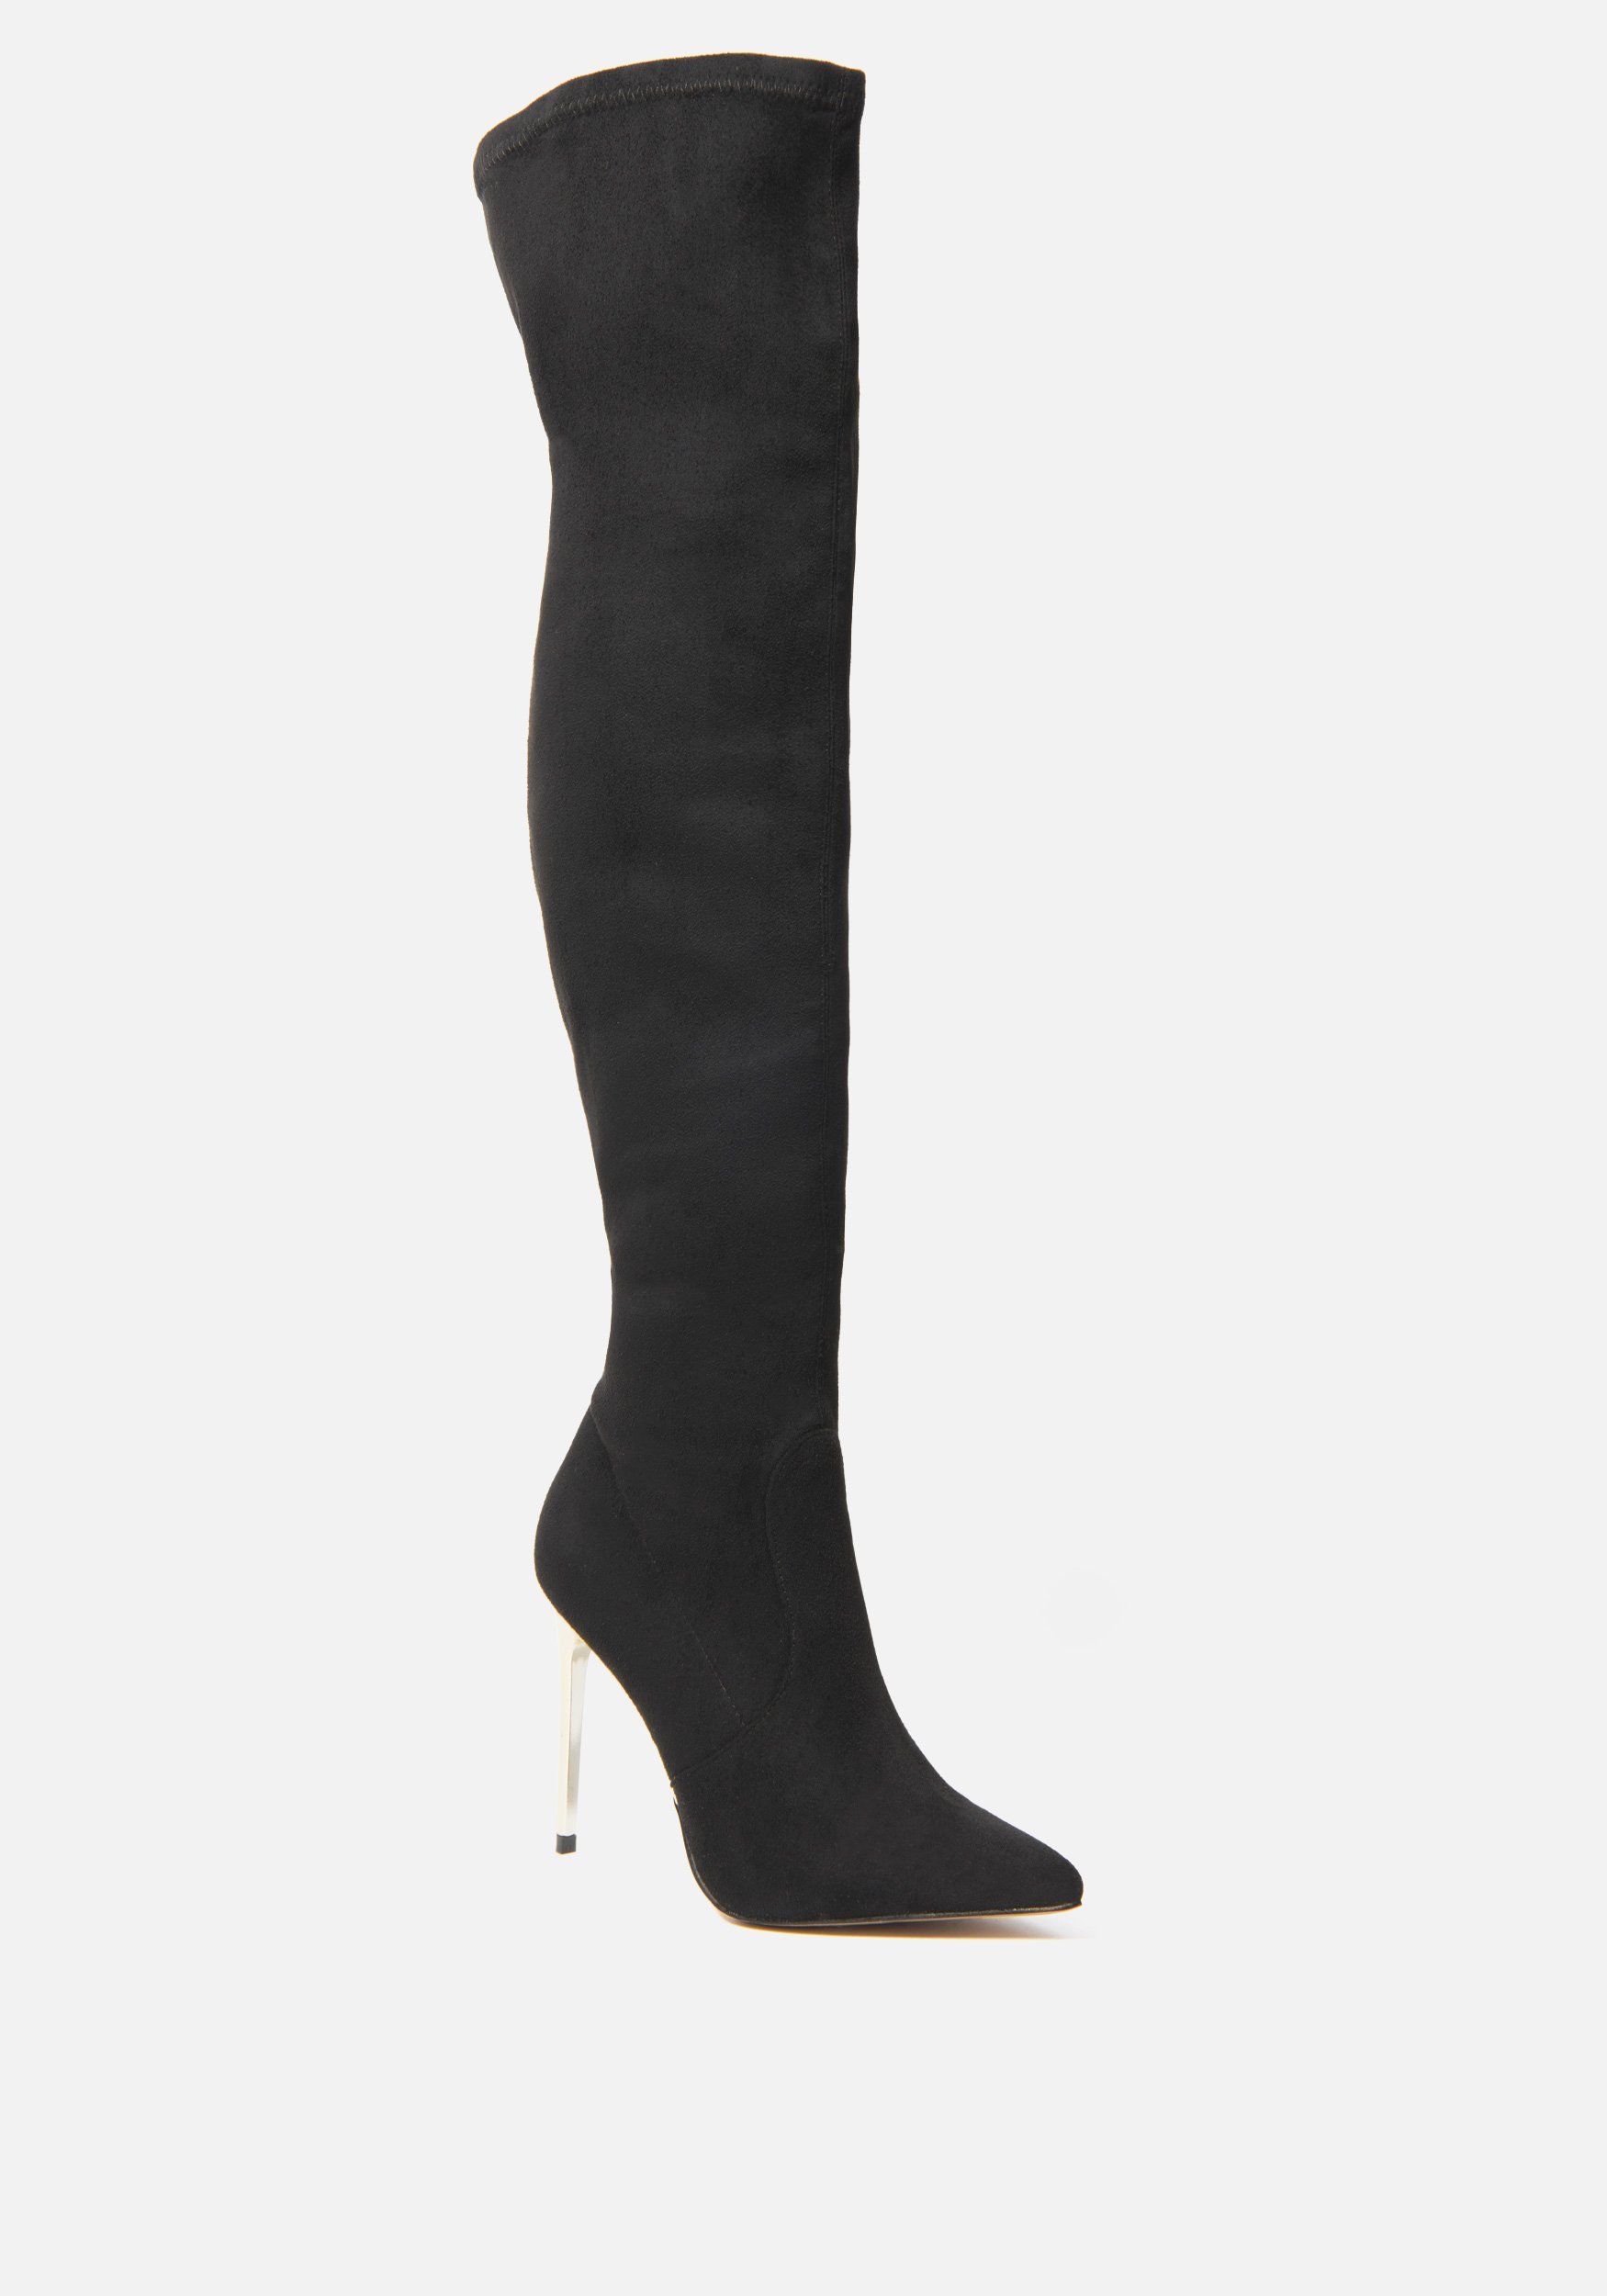 Bebe Women's Valirya Over the Knee Boots, Size 11 in BLACK SUEDE Synthetic